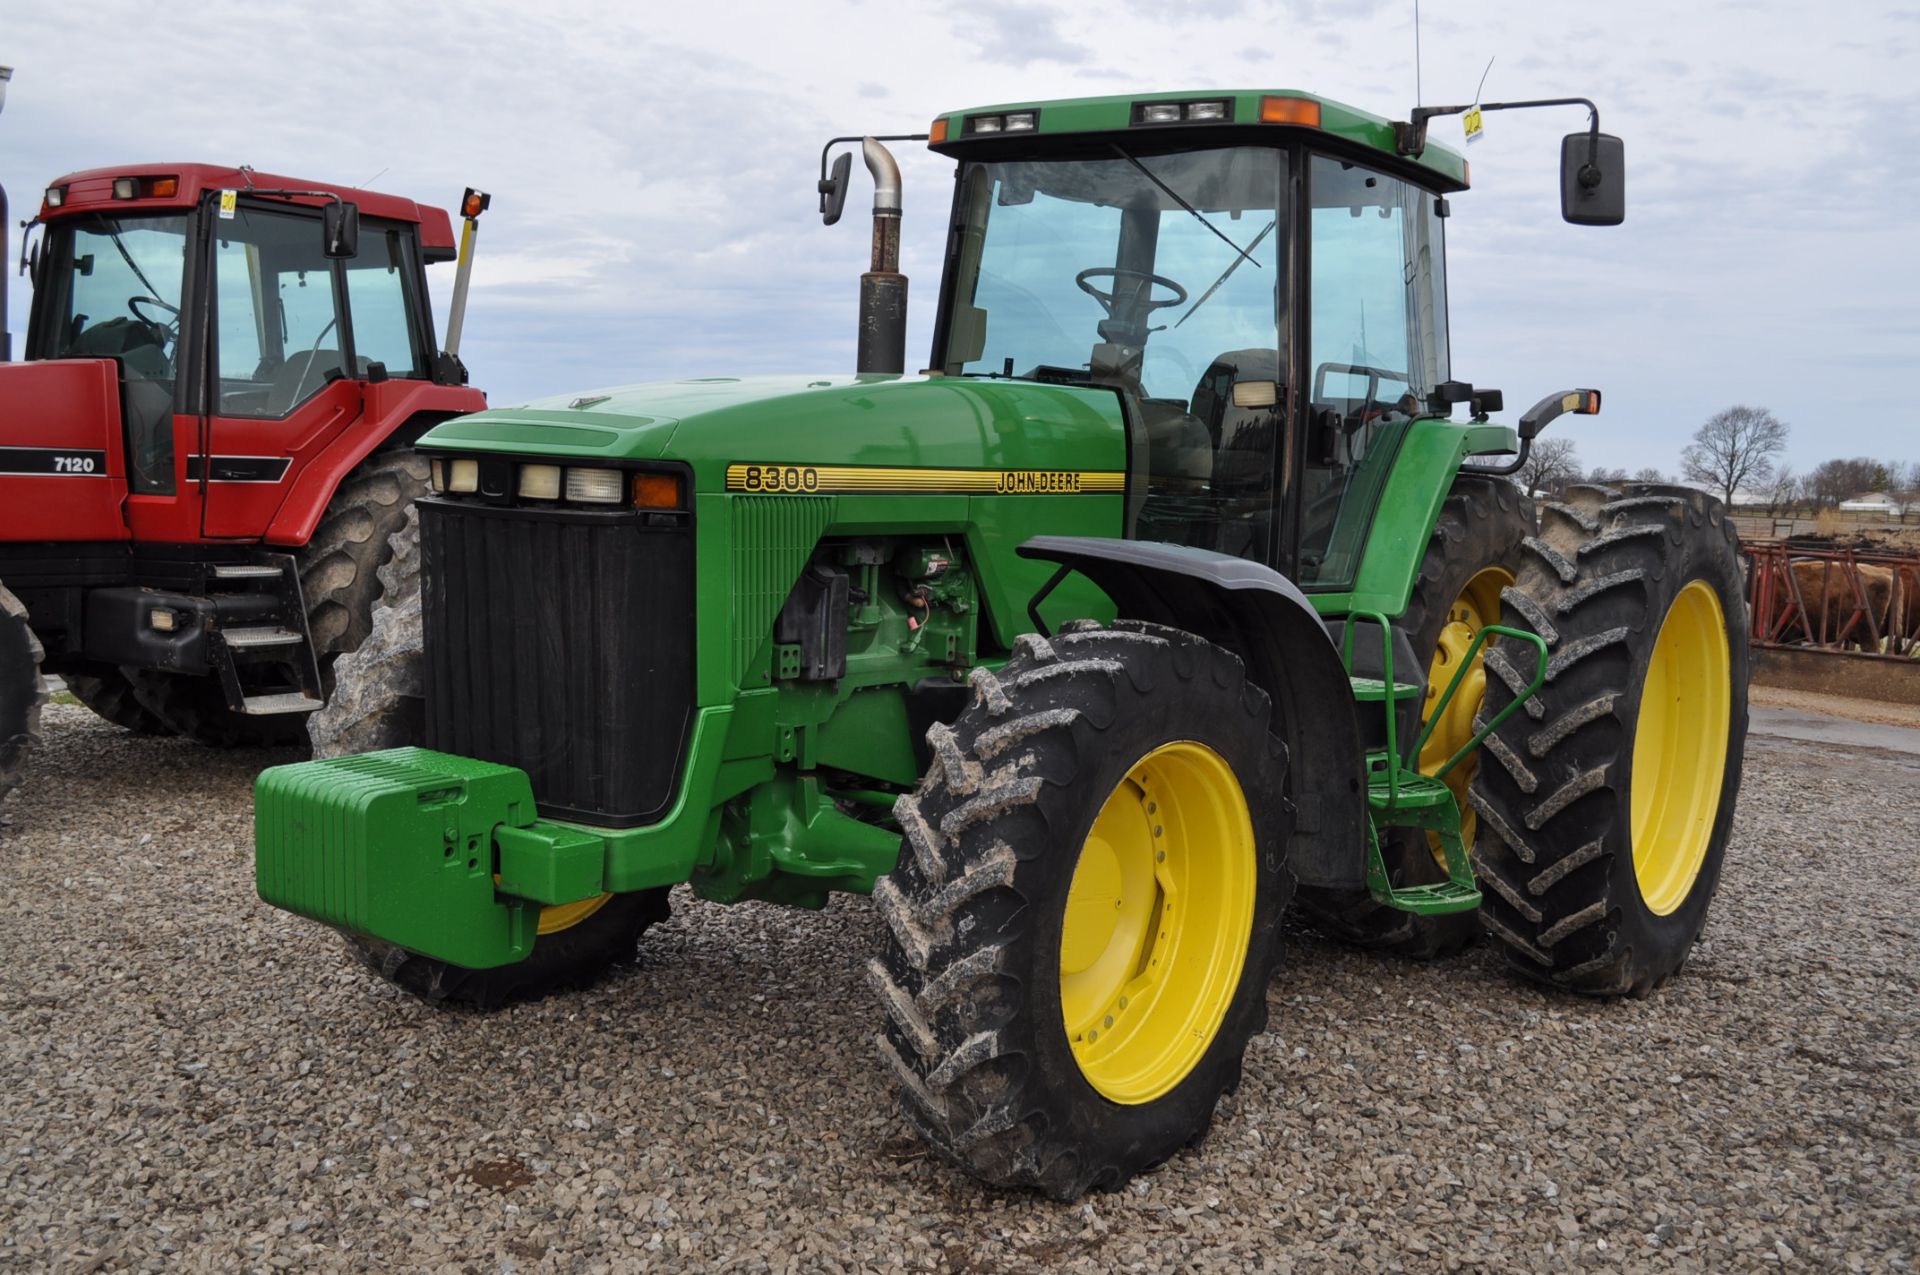 John Deere 8300 tractor, MFWD, 480/80 R 46 duals, 380/85 R 34 front, fenders, front wts, 4 hyd